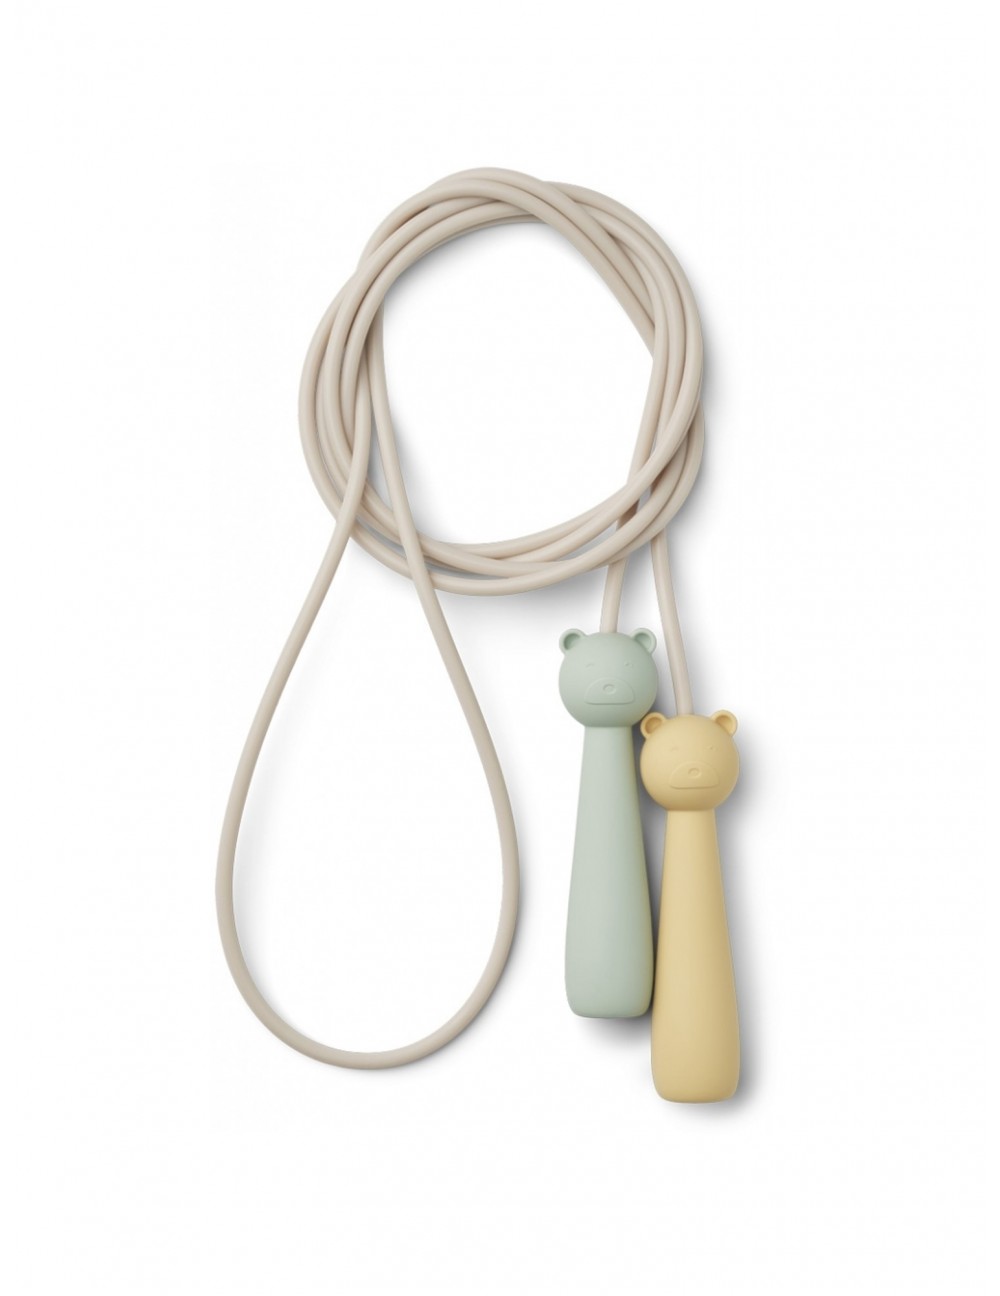 Corde a sauter dusty mint silicone